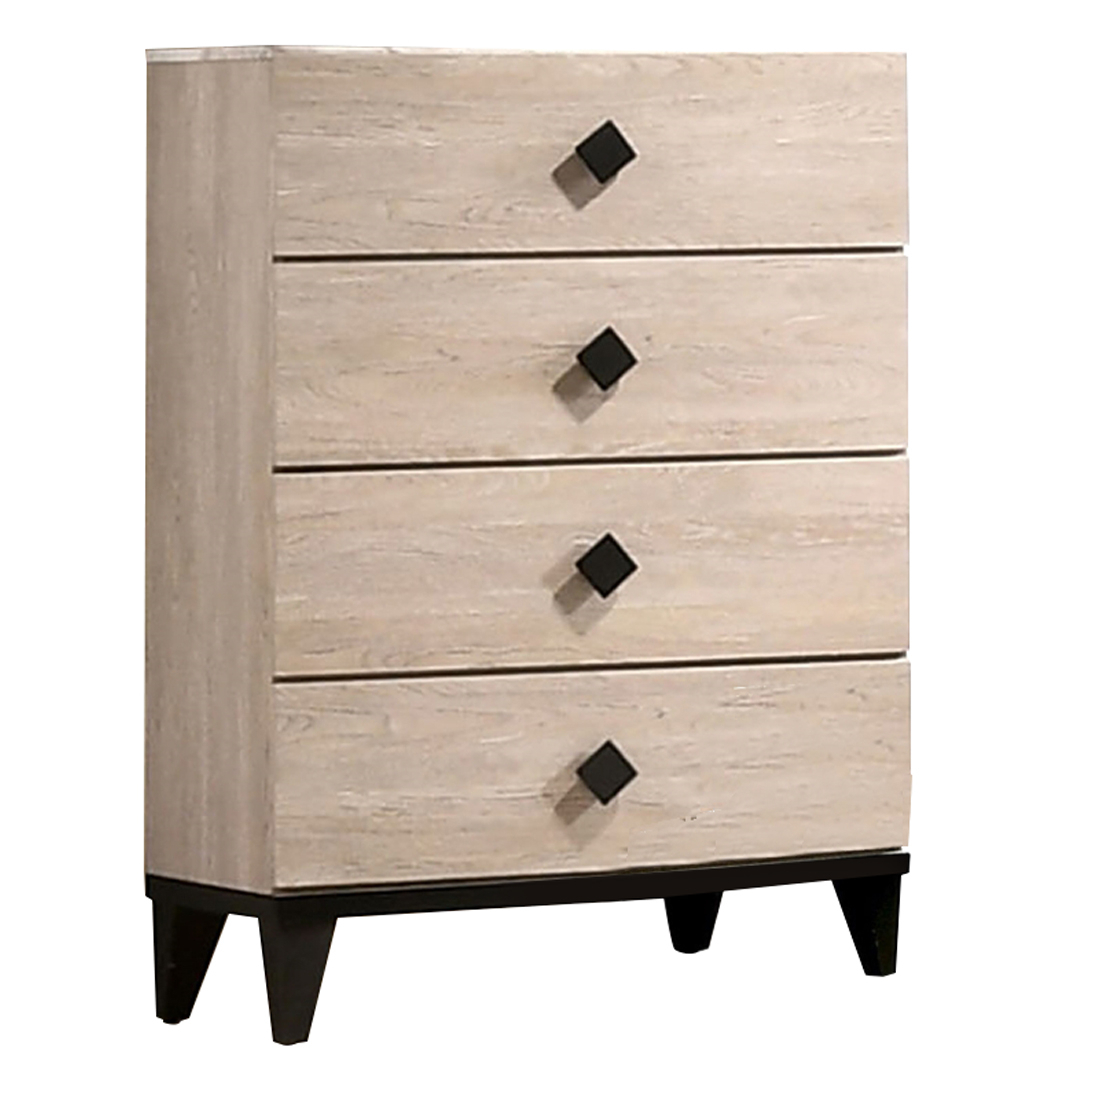 4 Drawer Wooden Chest With Grains And Angled Legs, Cream- Saltoro Sherpi